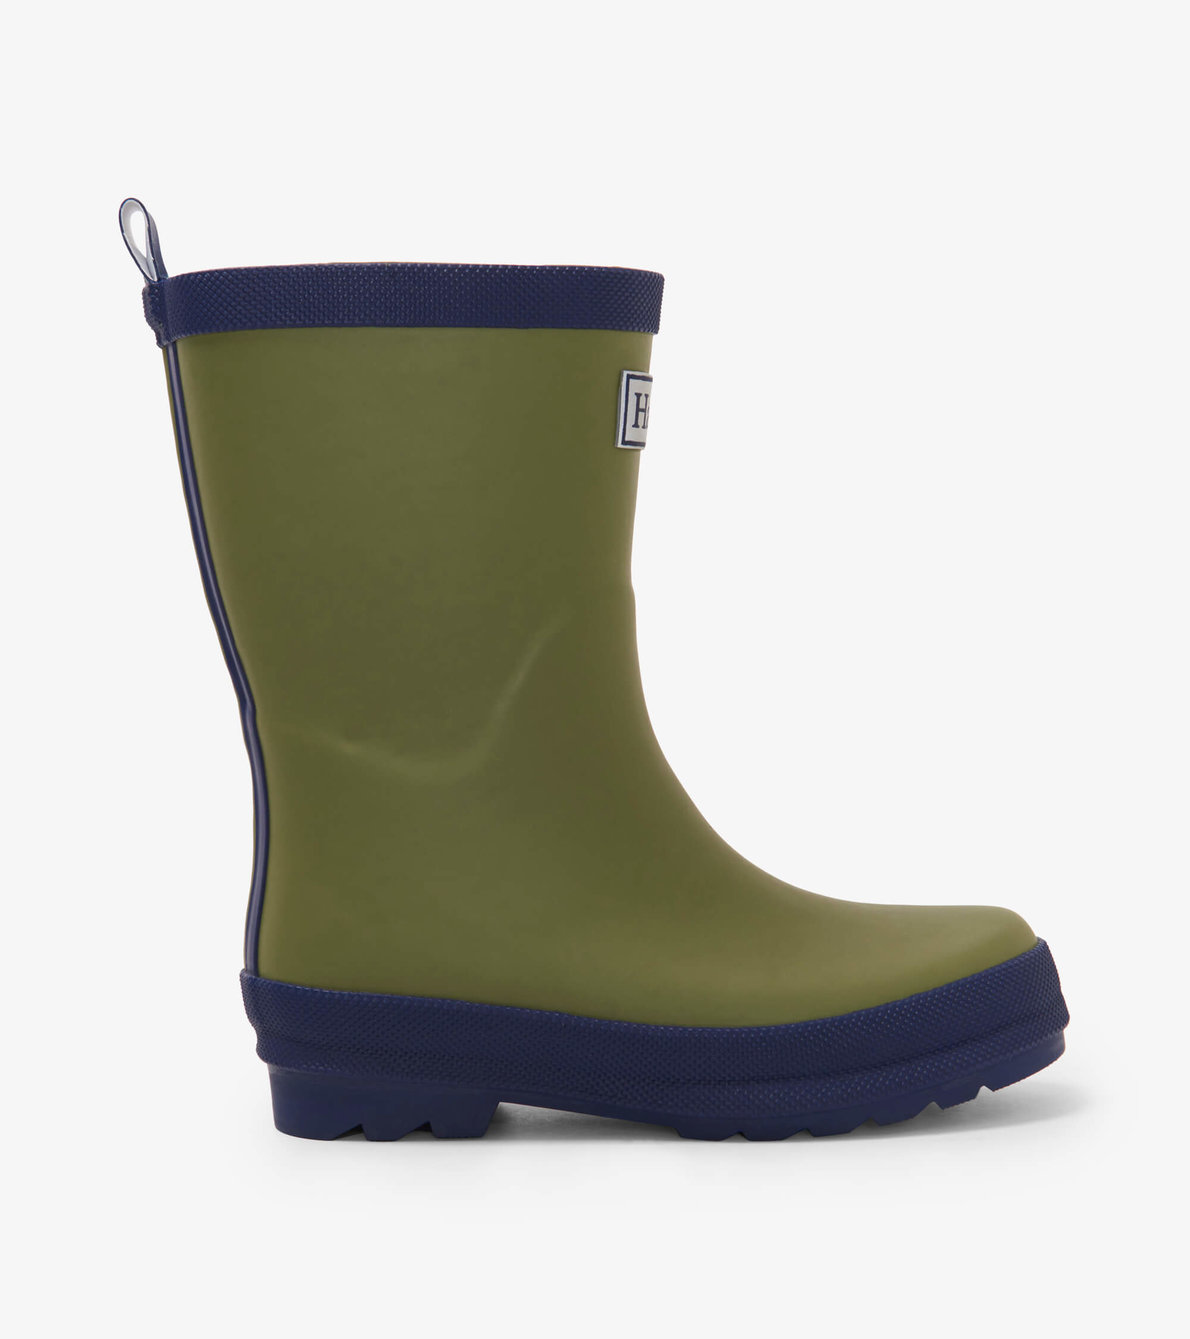 View larger image of Forest Green Matte Kids Rain Boots